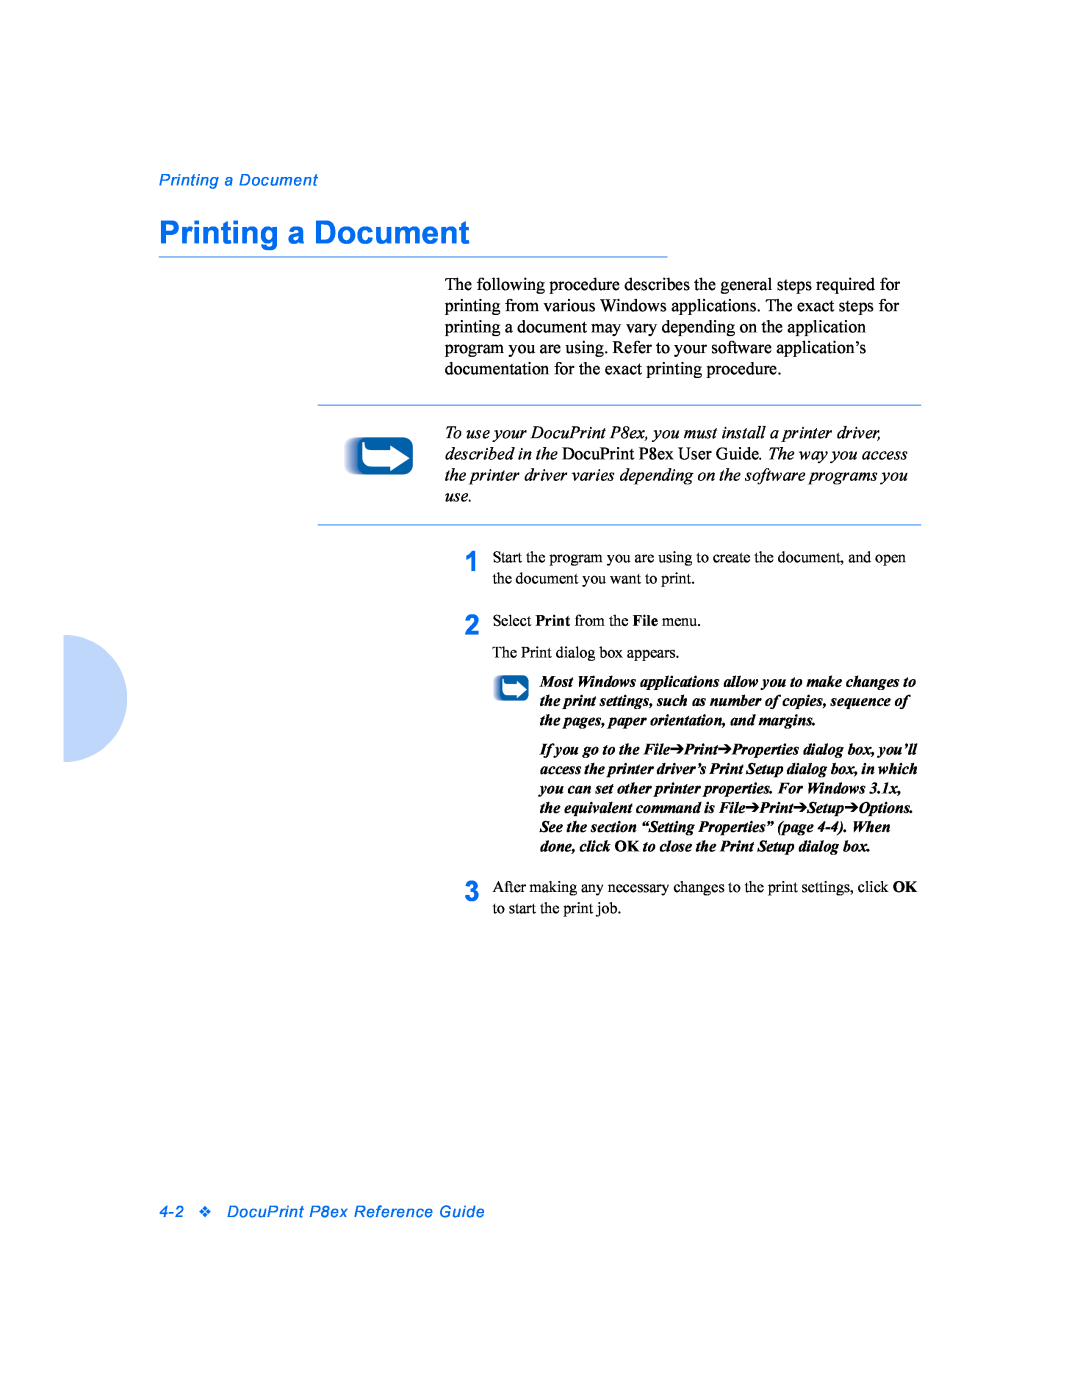 Xerox manual Printing a Document, 4-2DocuPrint P8ex Reference Guide 